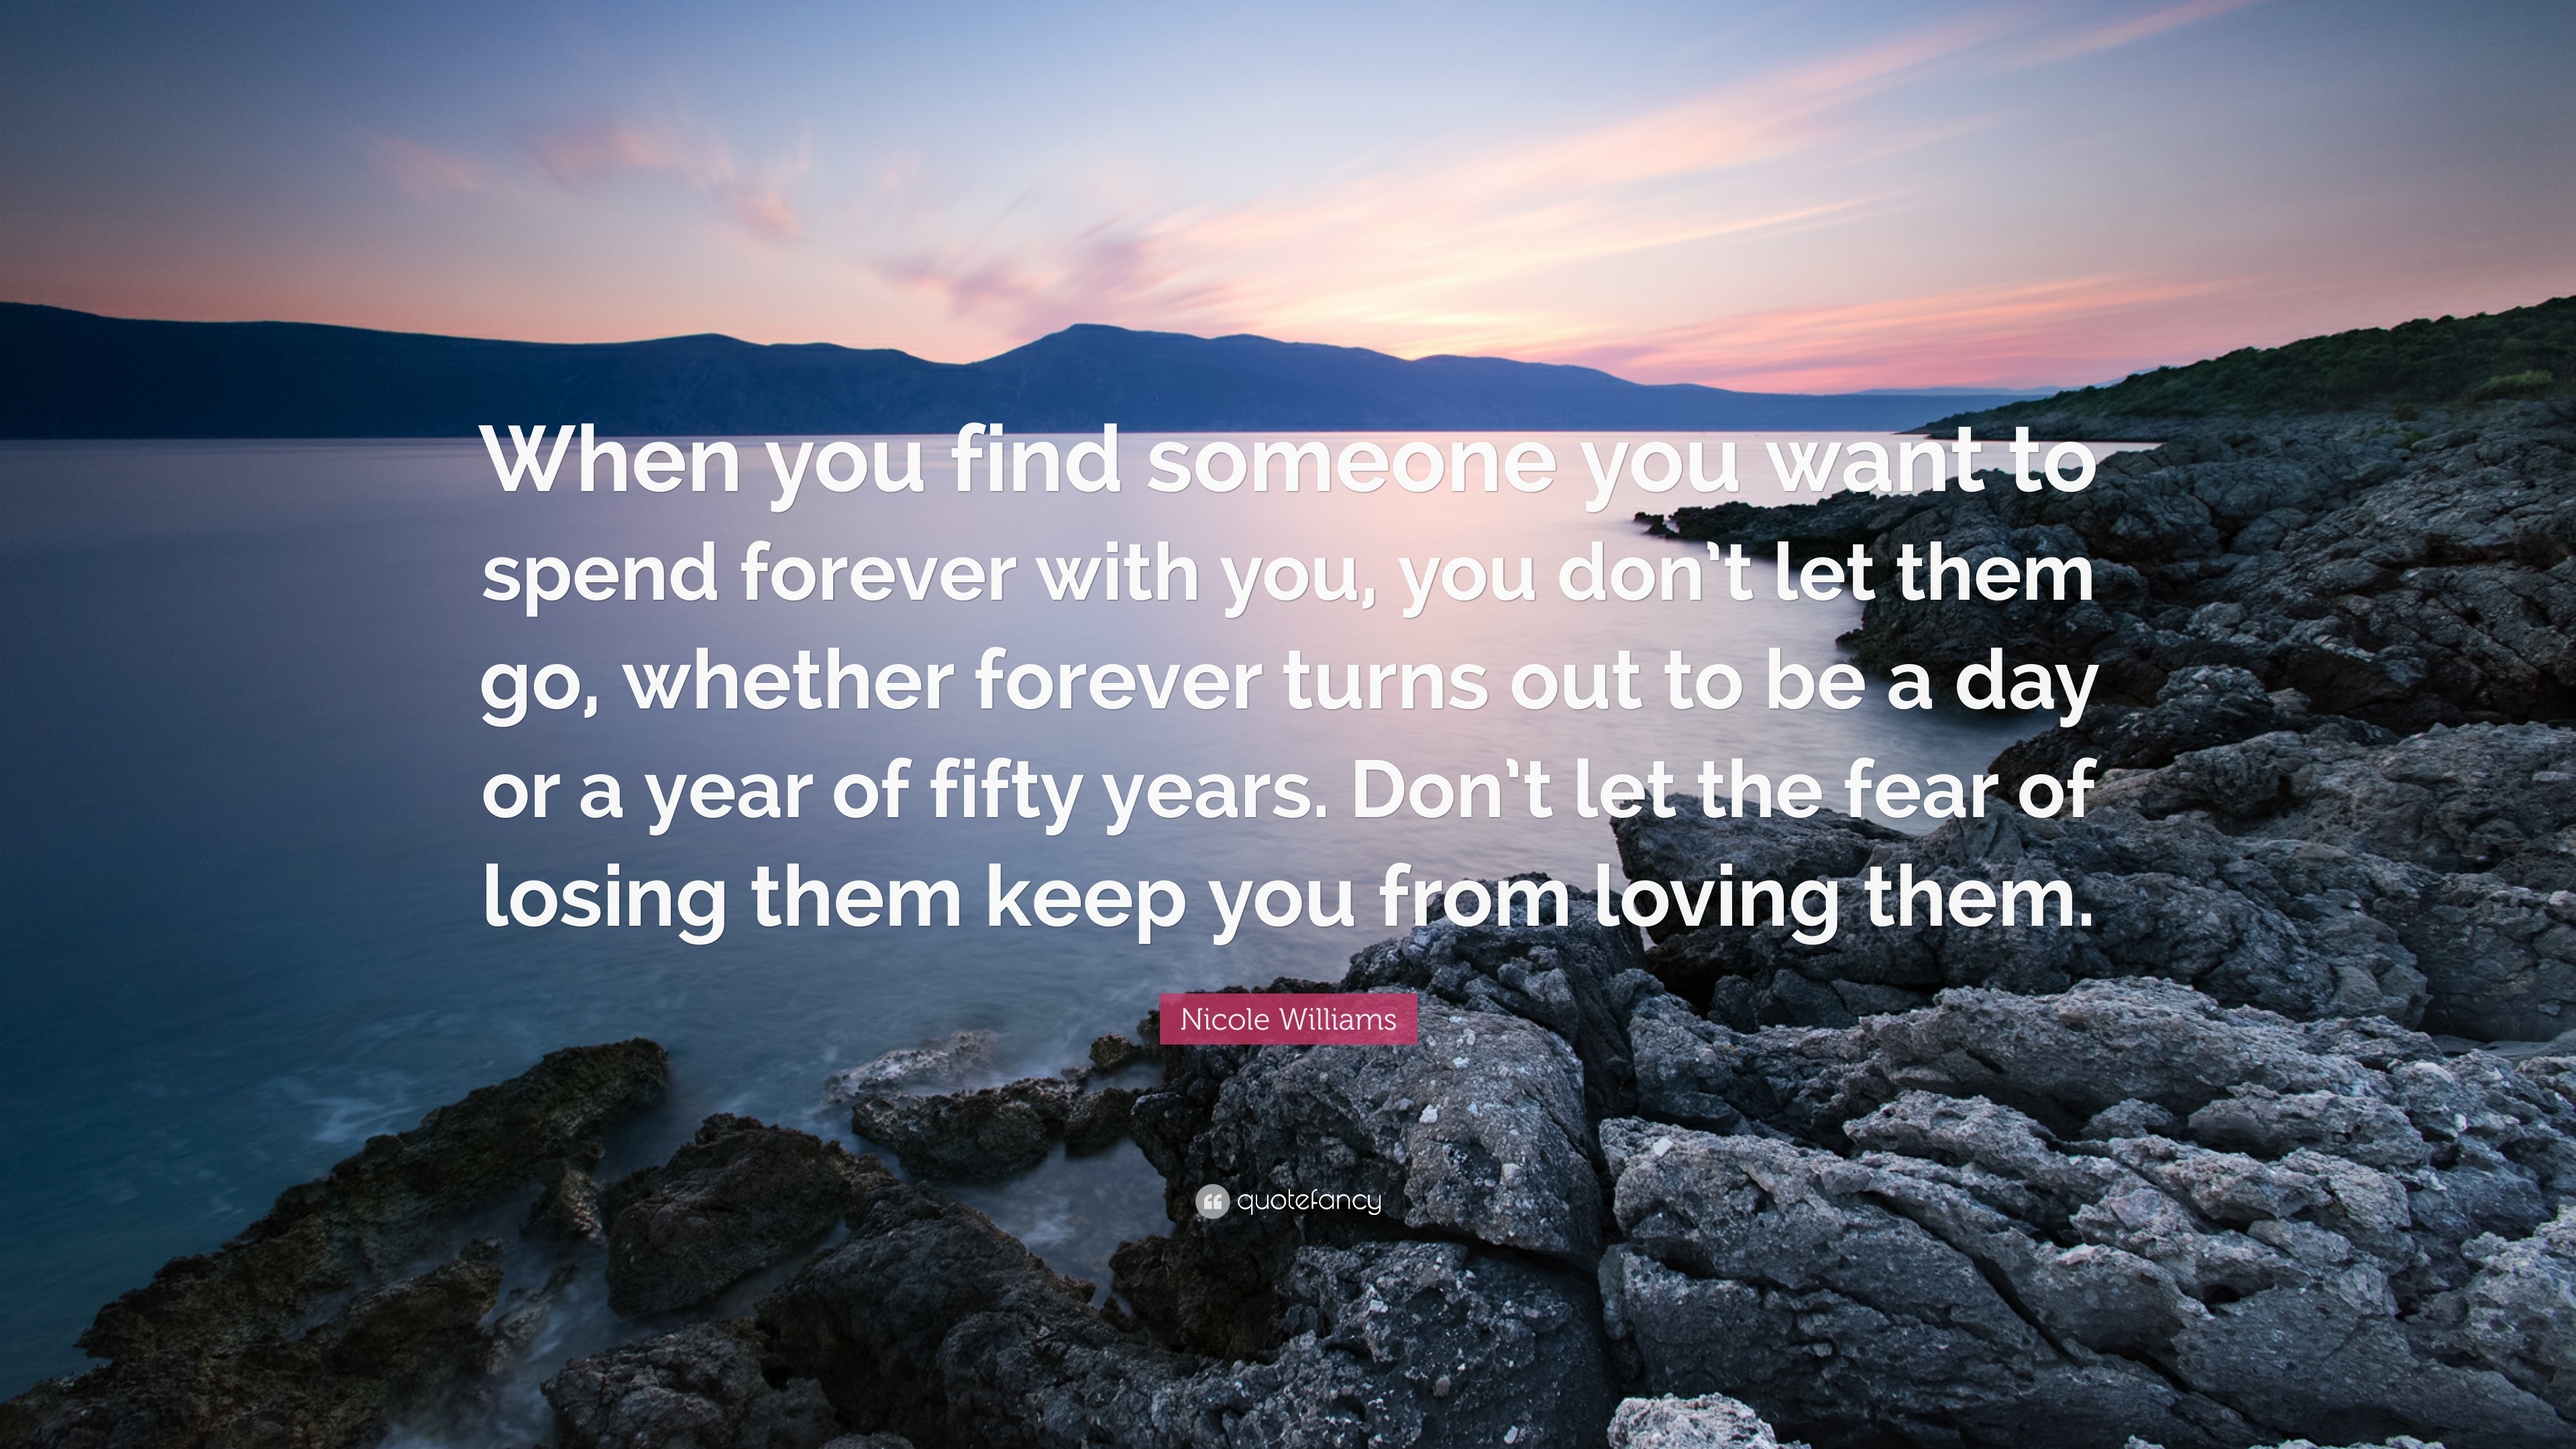 Nicole Williams Quote “When you find someone you want to spend forever with you